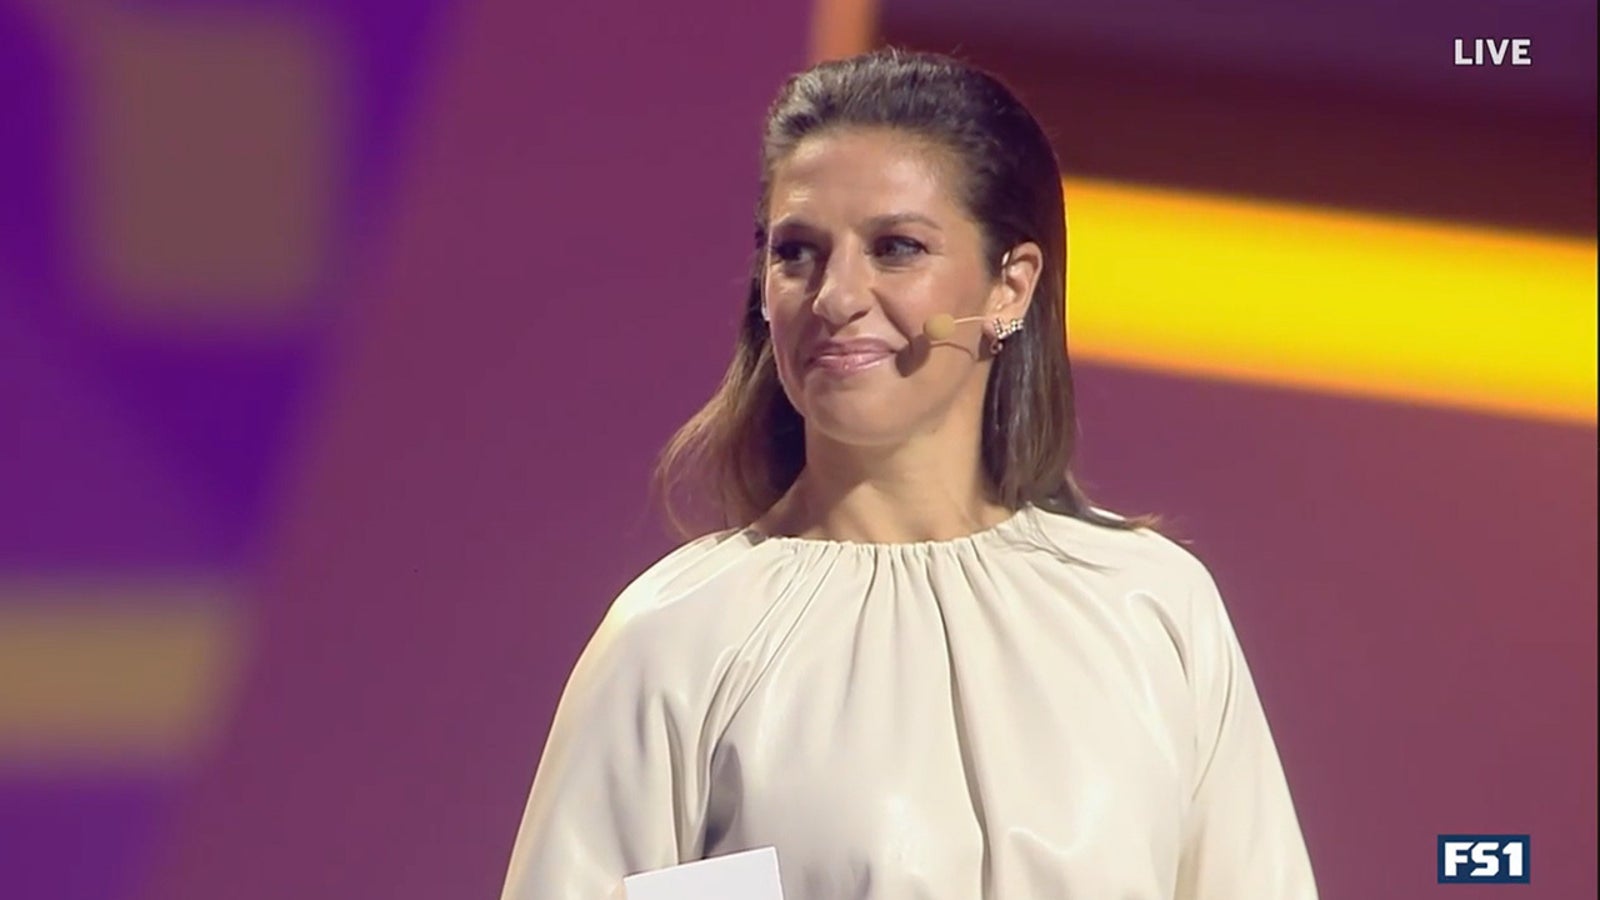 2022 FIFA World Cup: Carli Lloyd describes excitement and joy behind the draw